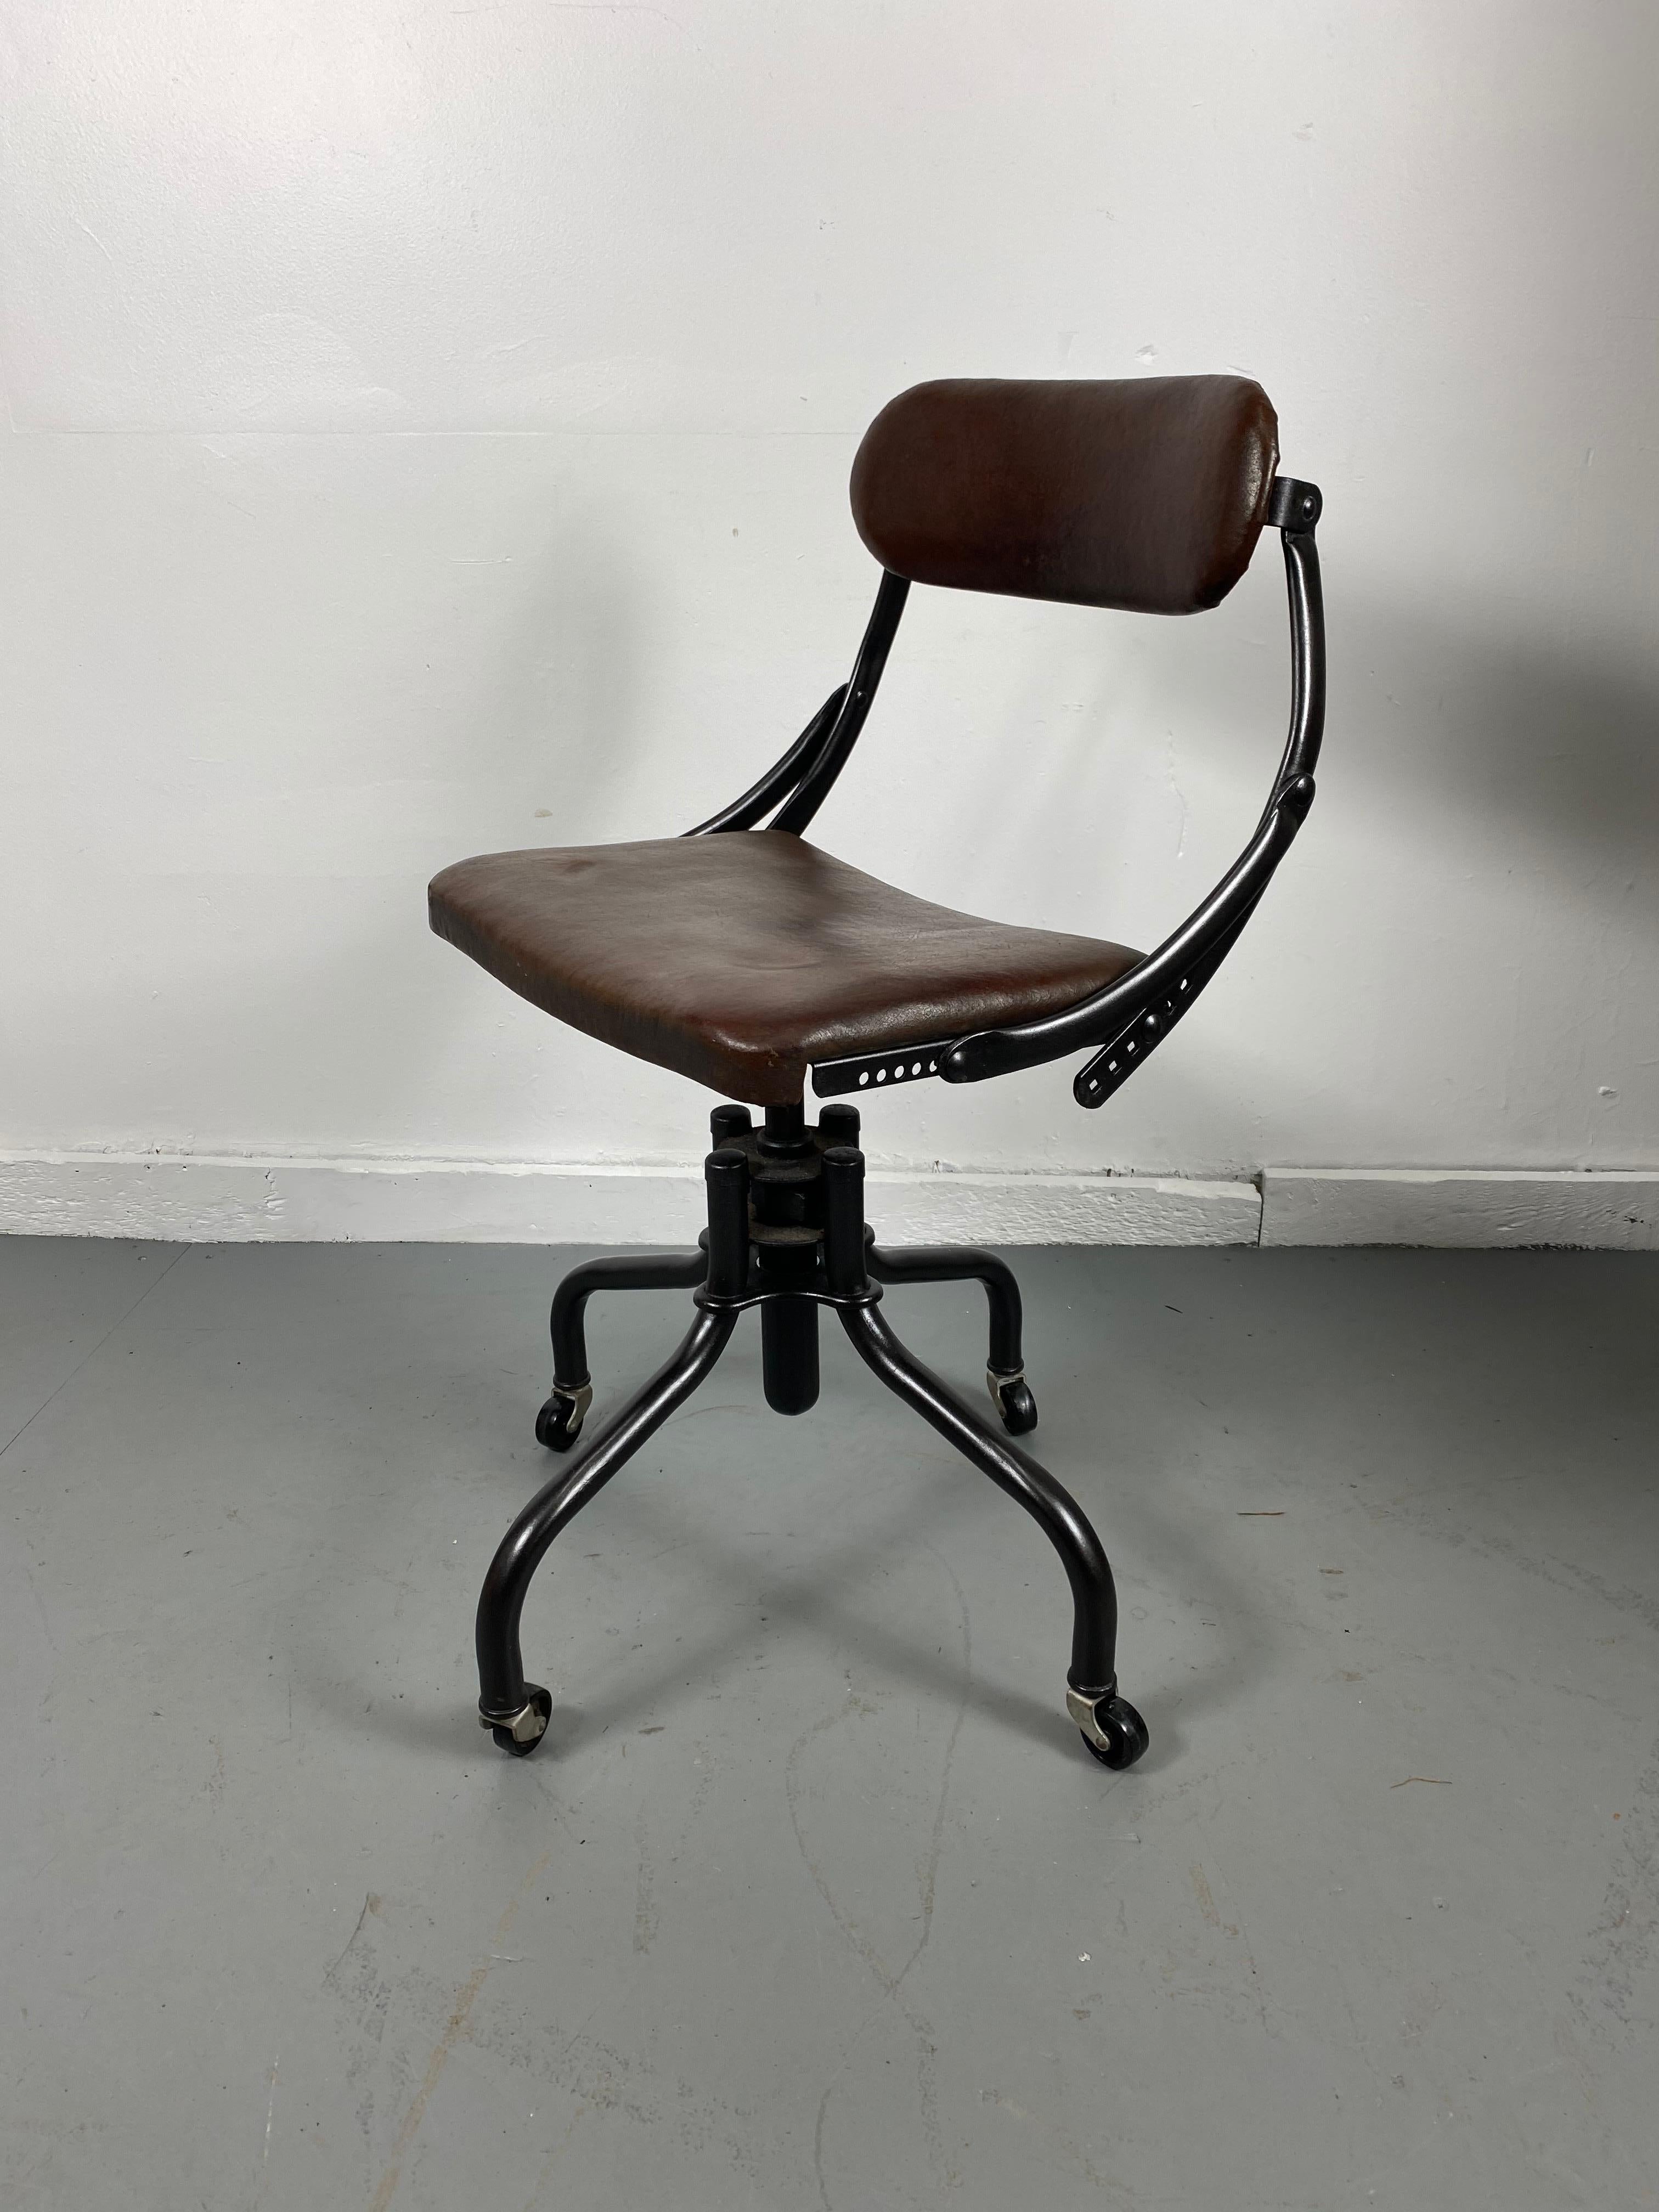 American 1930s Industrial Swivel Task / Desk Chair Manufactured by Do/ More, Art Deco